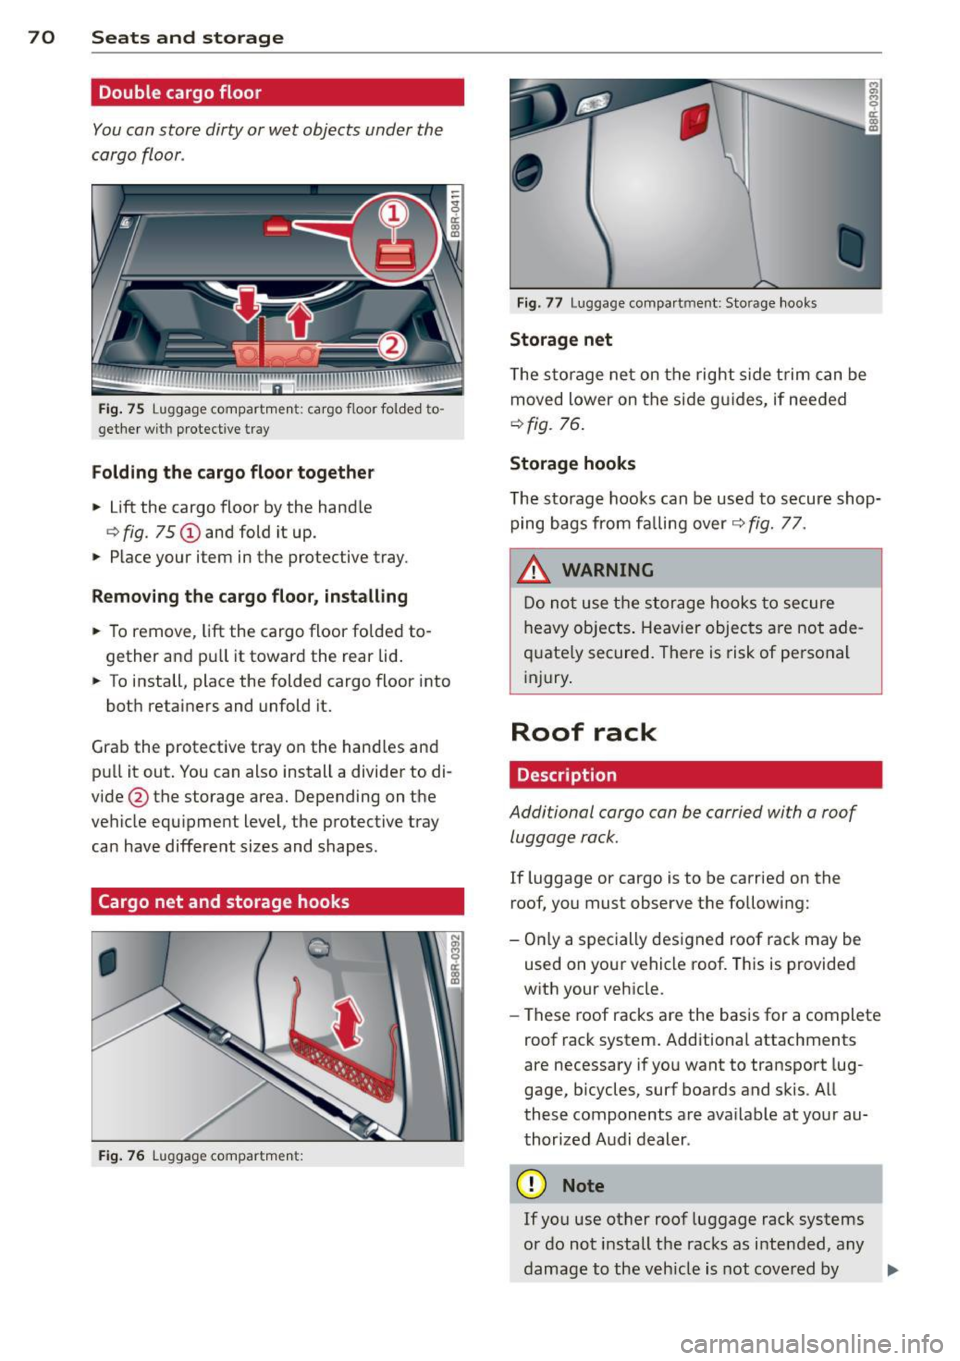 AUDI Q5 2013  Owners Manual 70  Seats  and storage 
Double  cargo floor 
You can store  dirty  or wet  objects  under  the 
cargo  floor . 
Fig. 75 Luggage compartment:  cargo  floor  folded  to· 
get he r wit h protective  tra